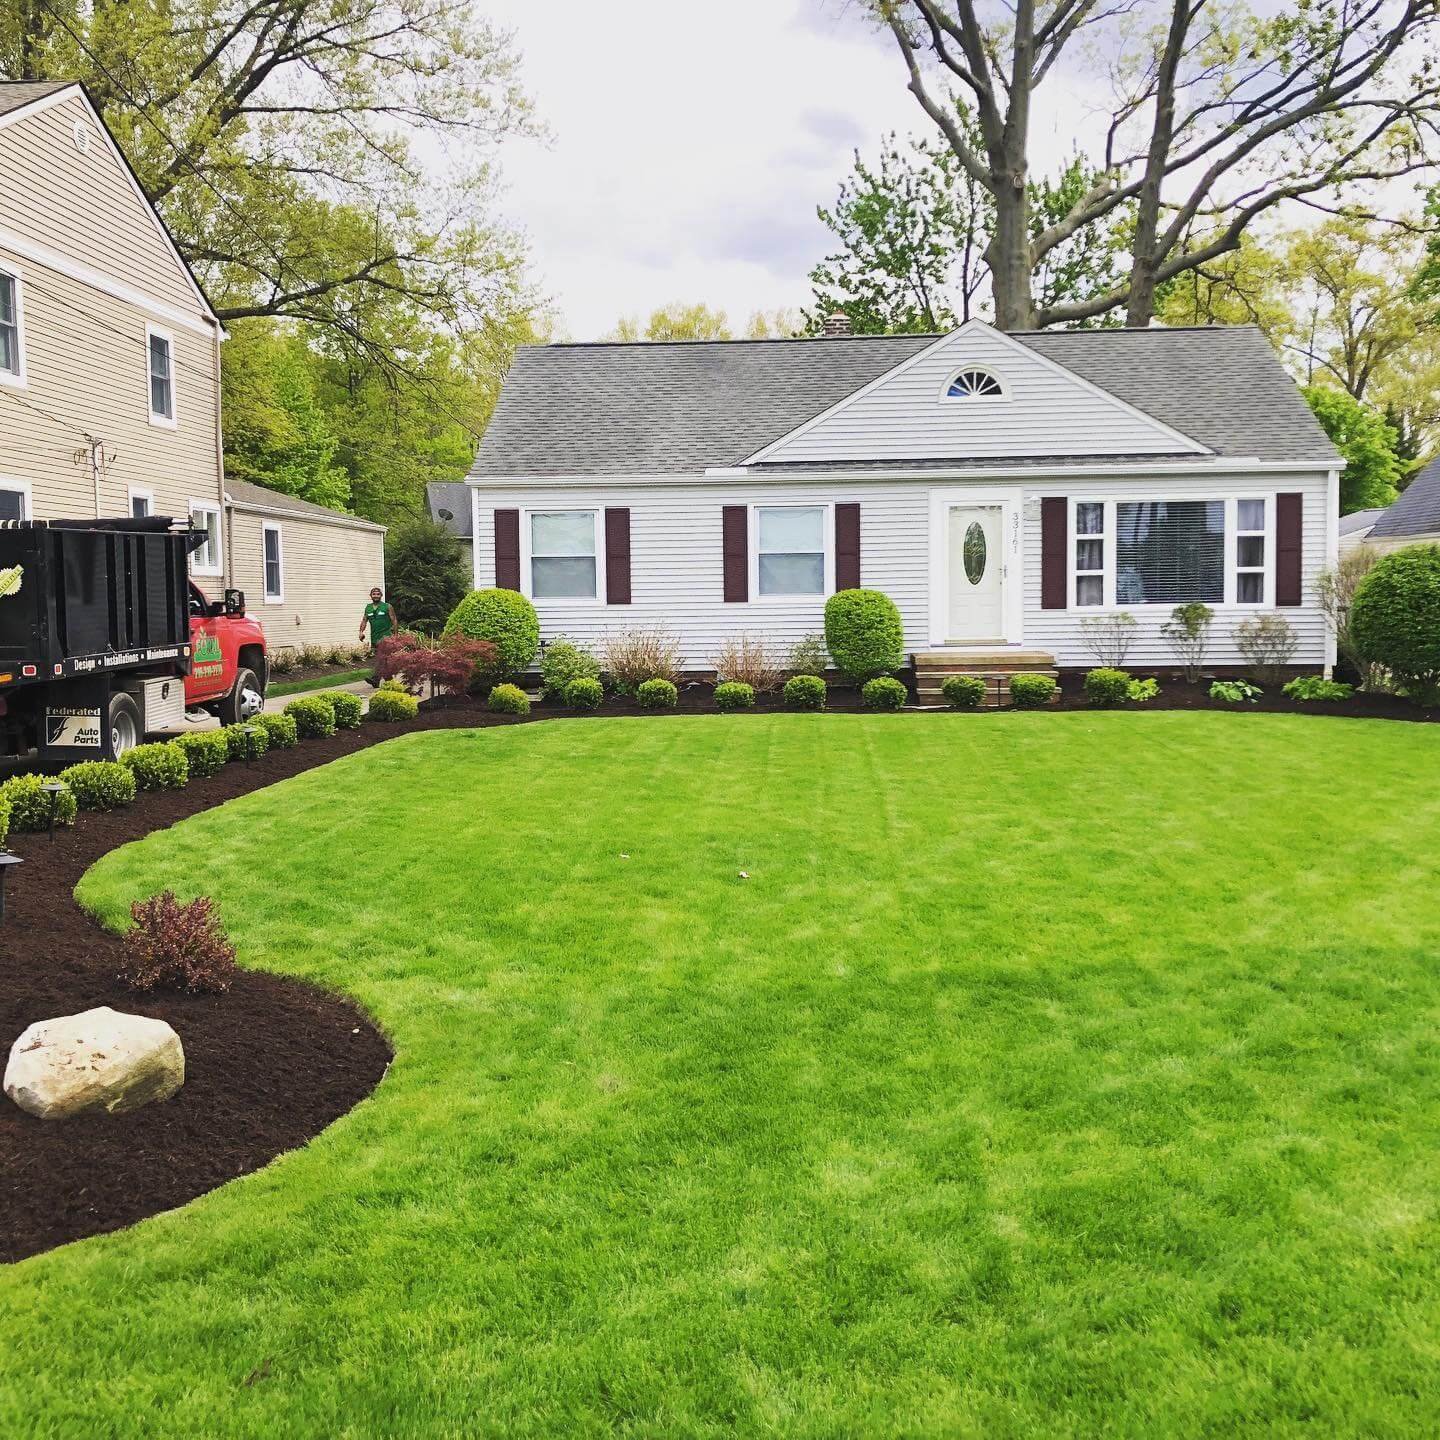 Landscaping Services in Northeast Ohio